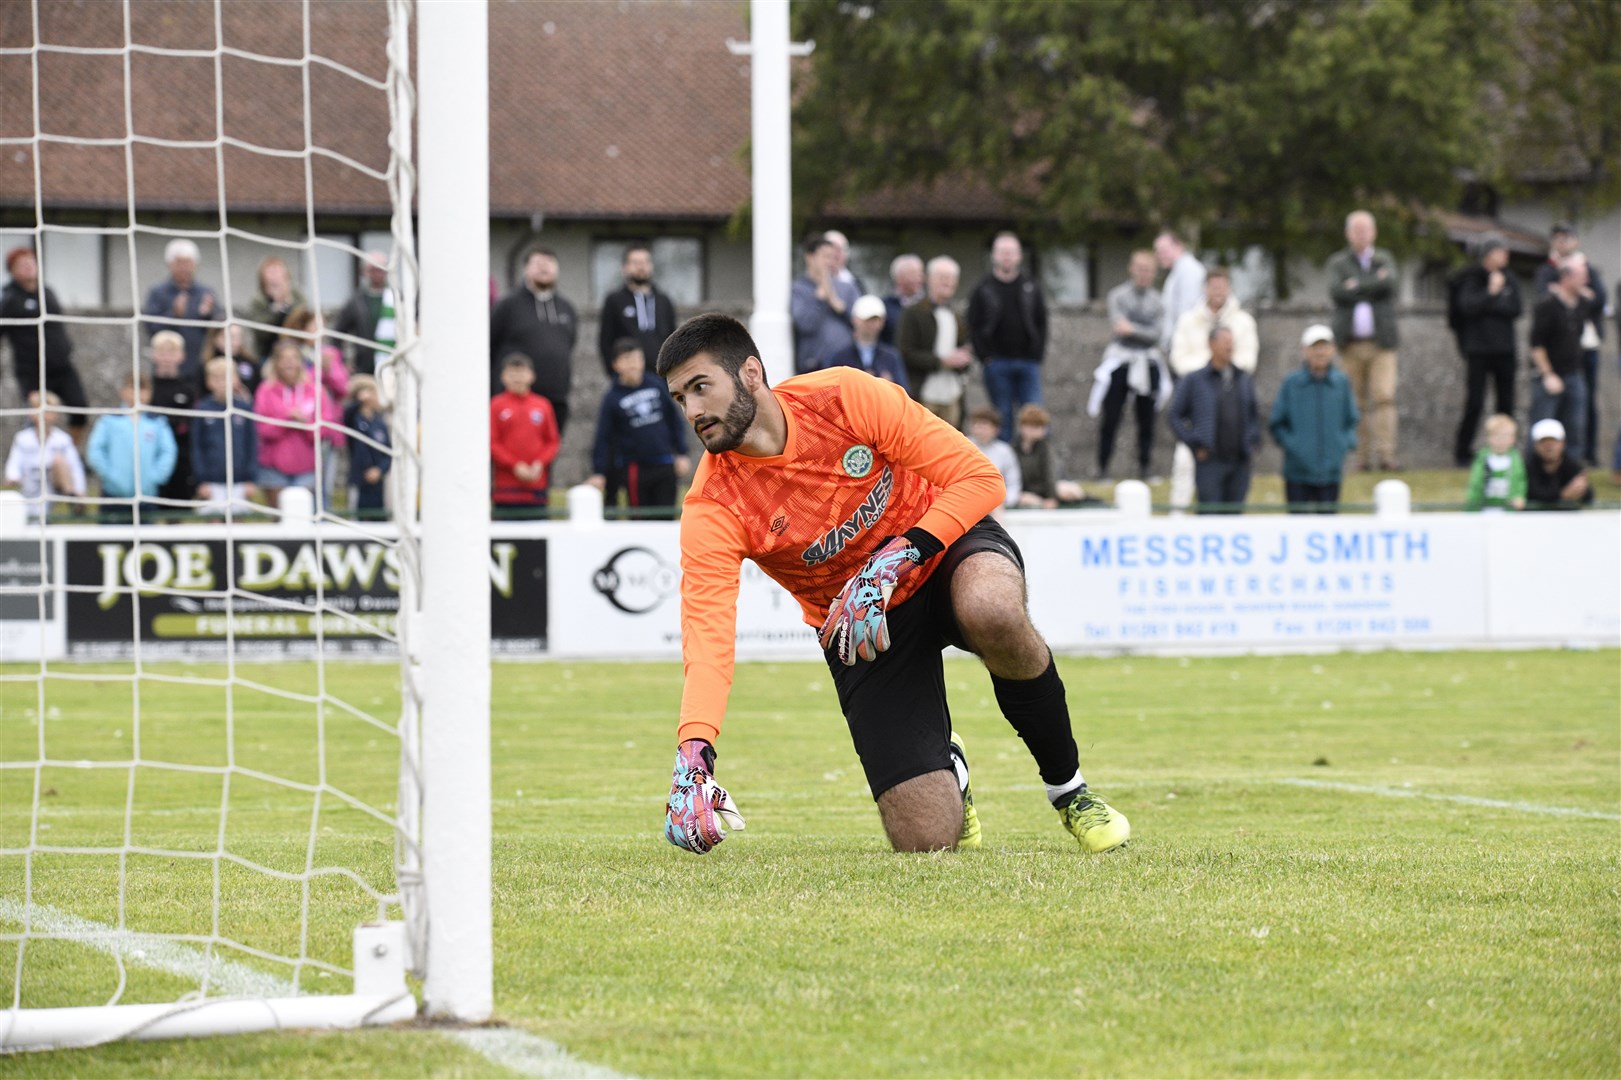 Balint Demus made several outstanding saves on his competitive debut for the Jags. Picture: Daniel Forsyth